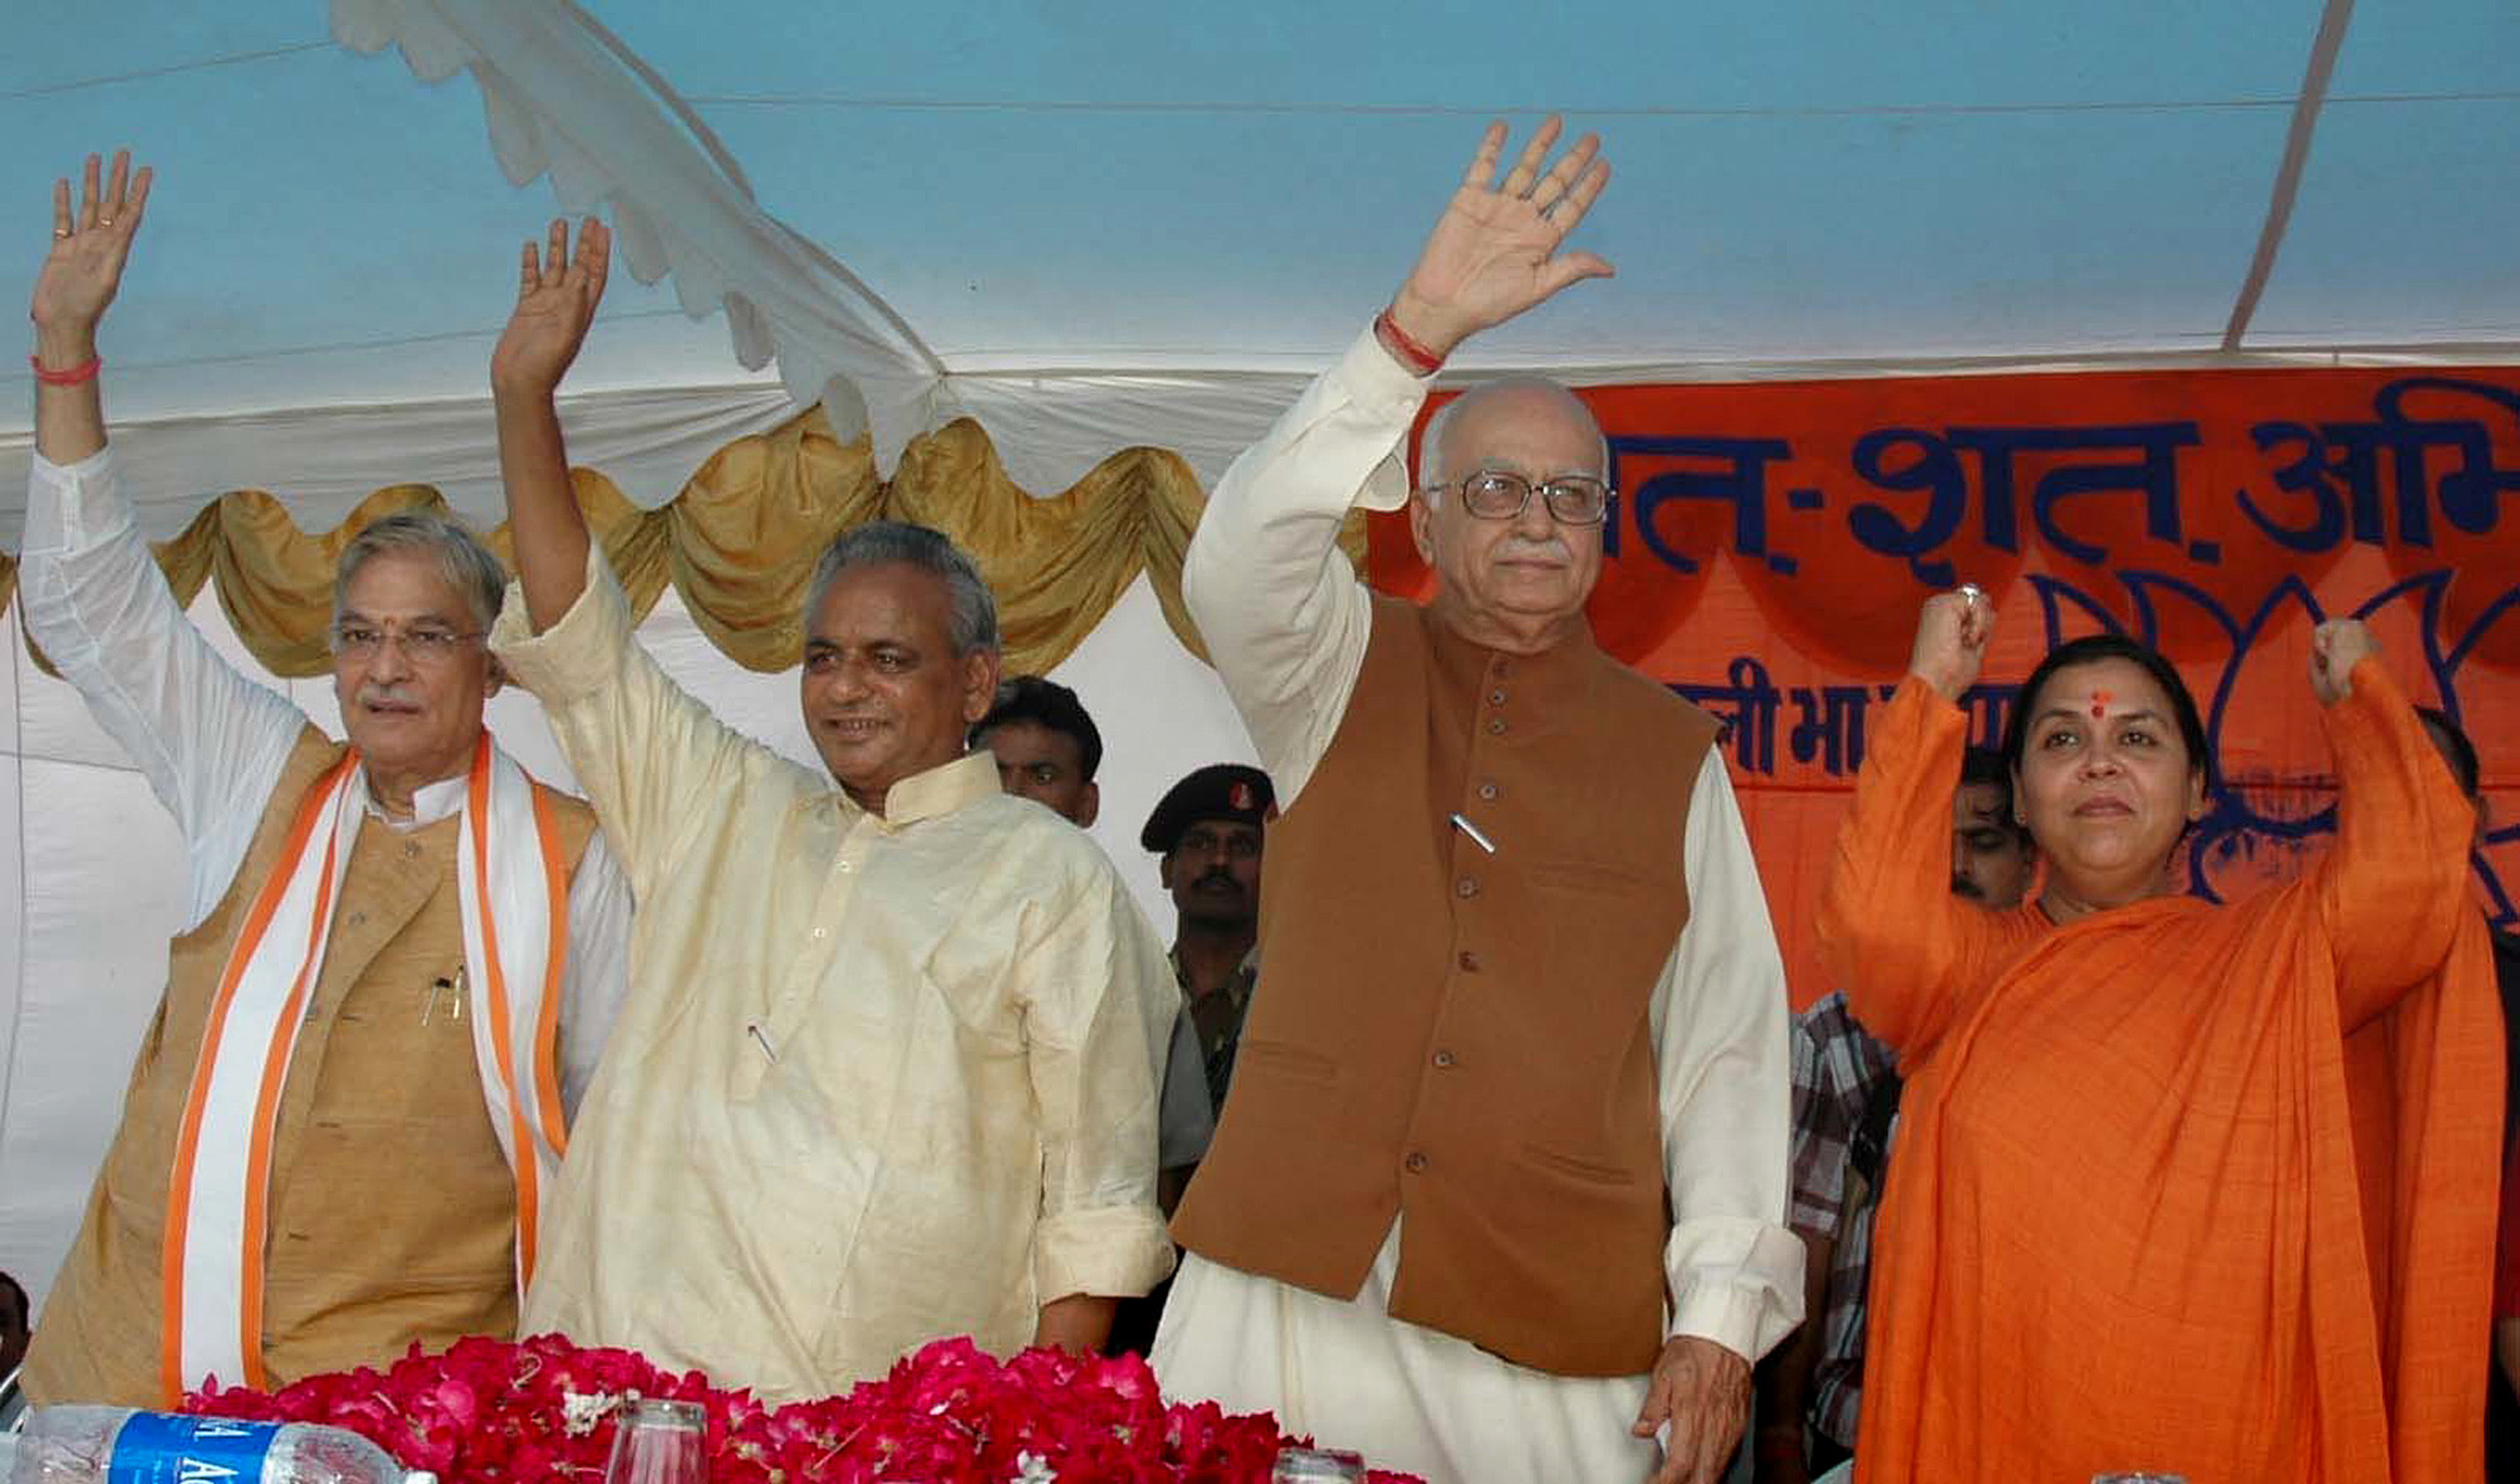 FILE - In this July 28, 2005 file photo, Indian opposition leader and President of the Bharatiya Janta Party (BJP) L.K. Advani, second right, senior BJP leaders Uma Bharati, right, Kalyan Singh, second left, and Murli Manohar Joshi wave to people during a public rally in Rae Bareilly, in the northern Indian state of Uttar Pradesh. India's top court said Wednesday, April 19, 2017, that the four senior leaders of India's ruling Hindu nationalist Bharatiya Janata Party will stand trial for their role in a criminal conspiracy over the destruction of the 16th century Babri mosque in 1992, an event that sparked bloody nationwide rioting. Of the four main leaders who will now stand trial, Singh is currently the governor of an Indian province, and the constitution protects him from criminal trial. Therefore his trial will start after his term ends. (AP Photo/Rajesh Kumar Singh, File)